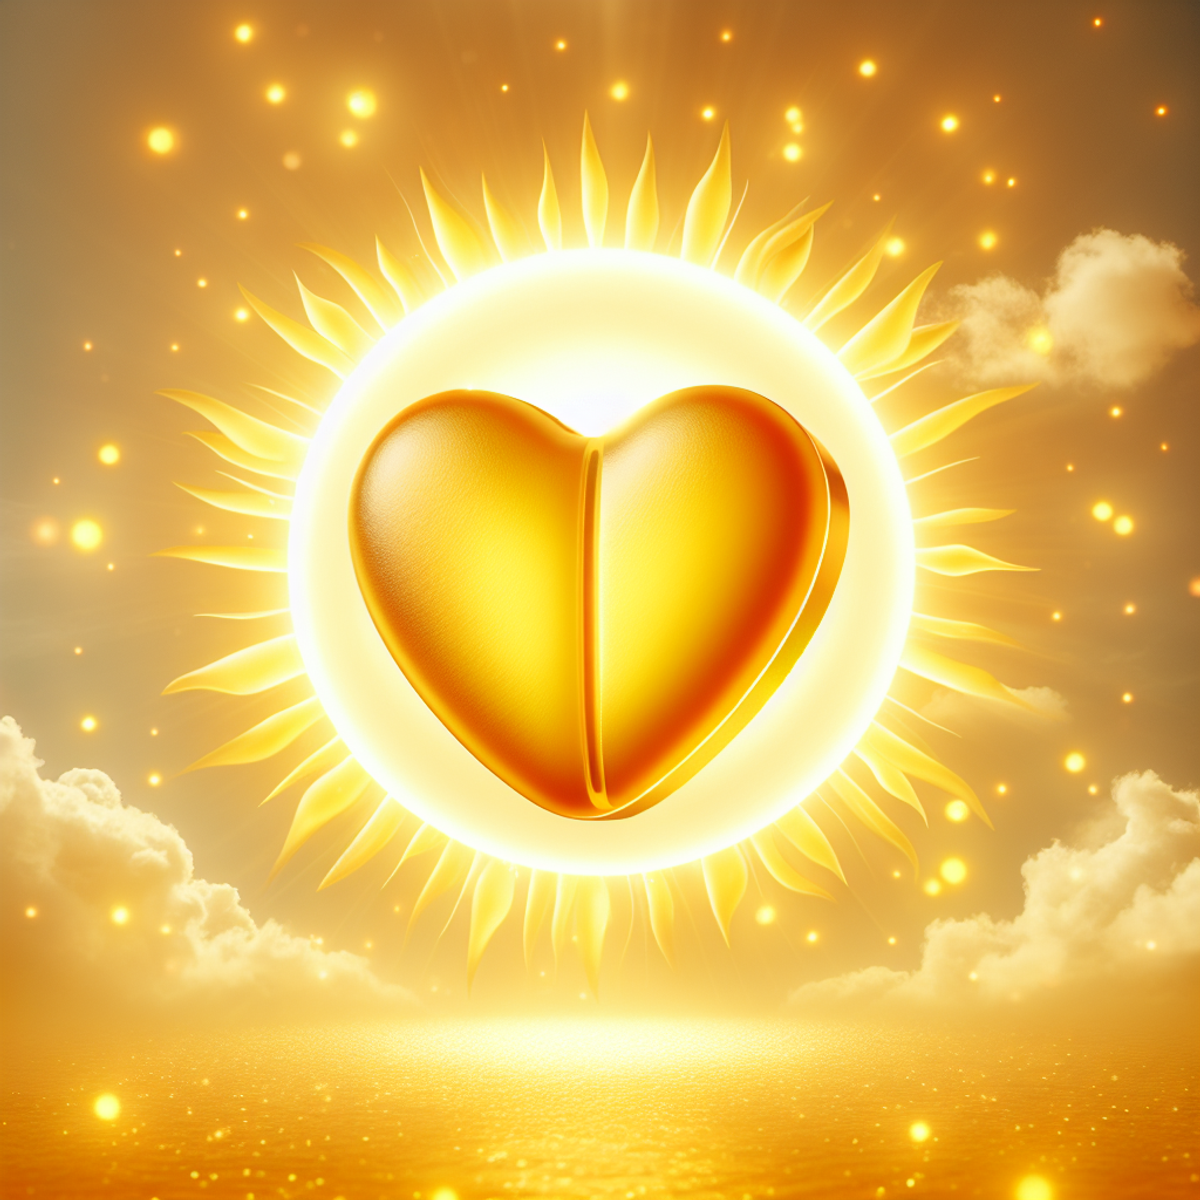 A heart-shaped vitamin D3 pill basking in the glow of a radiant sun.